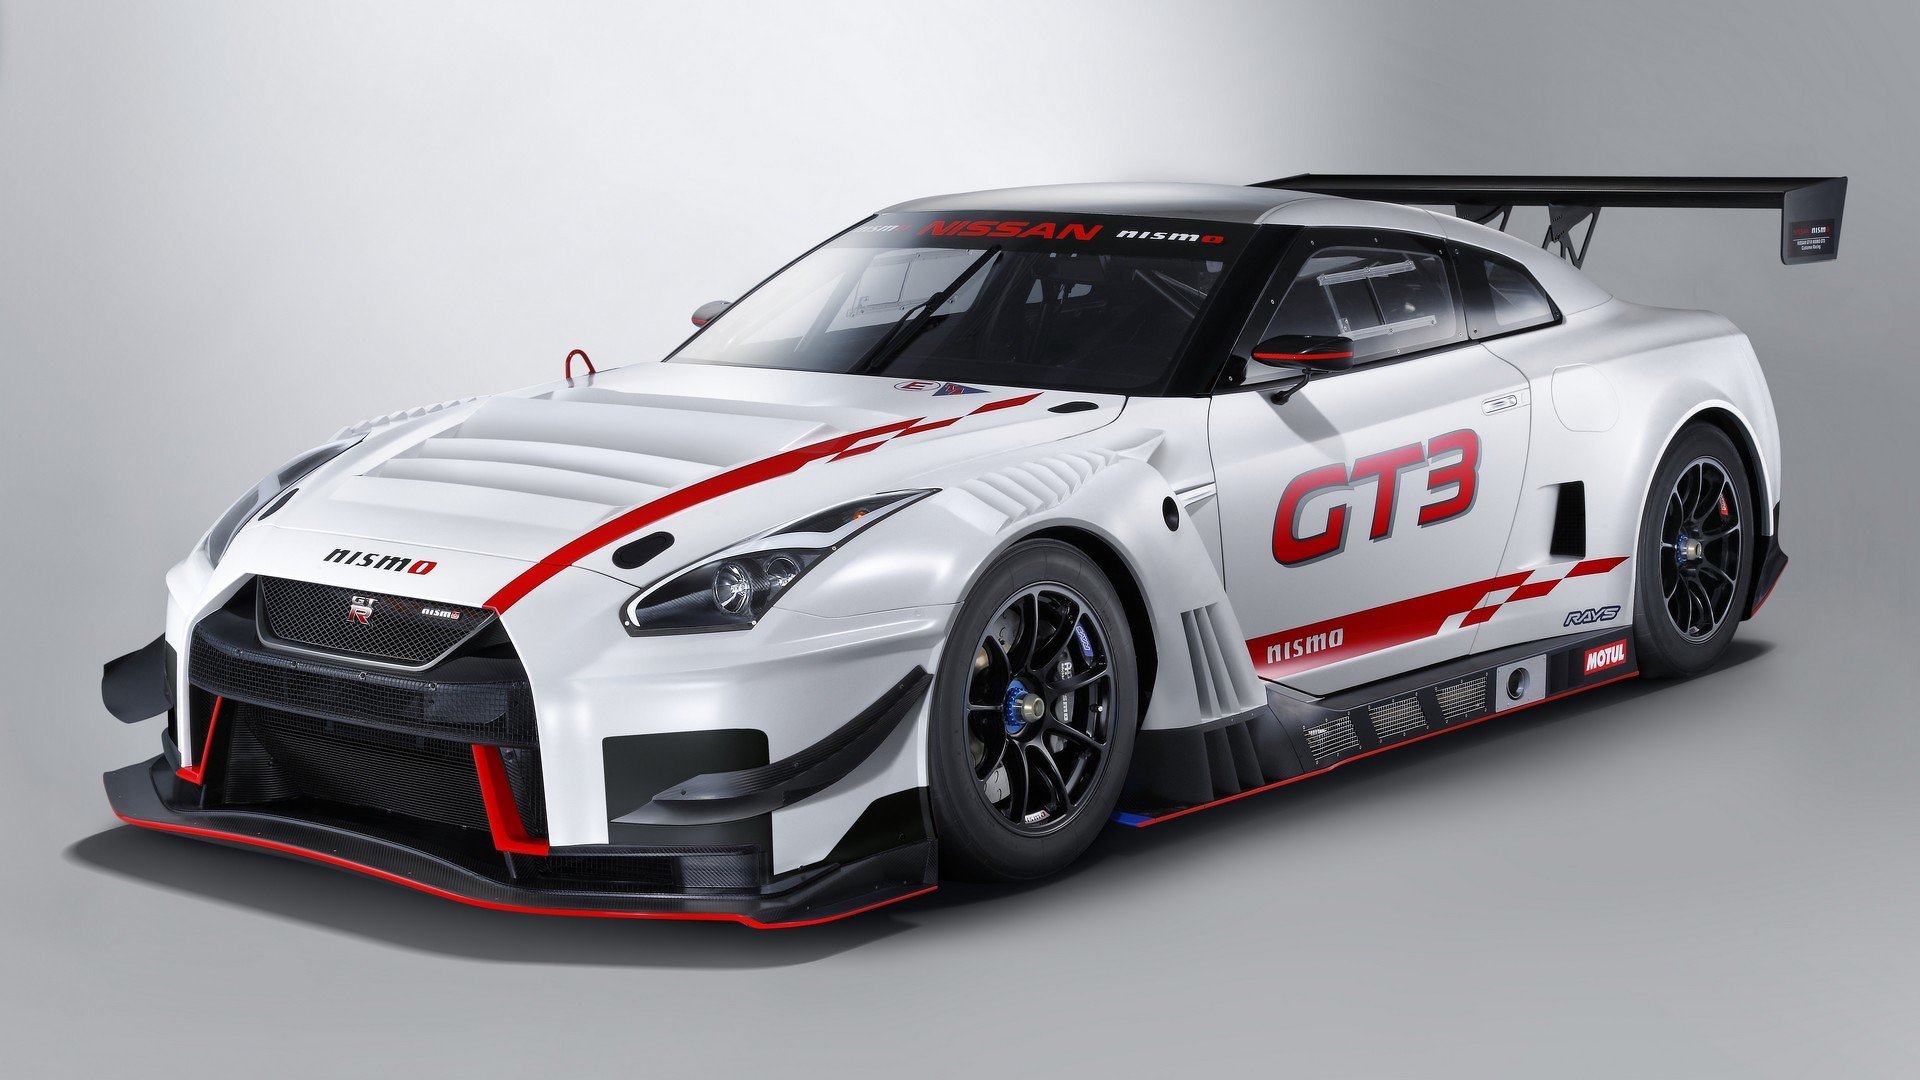 High hopes set on 2018 Nissan GT-R Nismo GT3’s racing performance